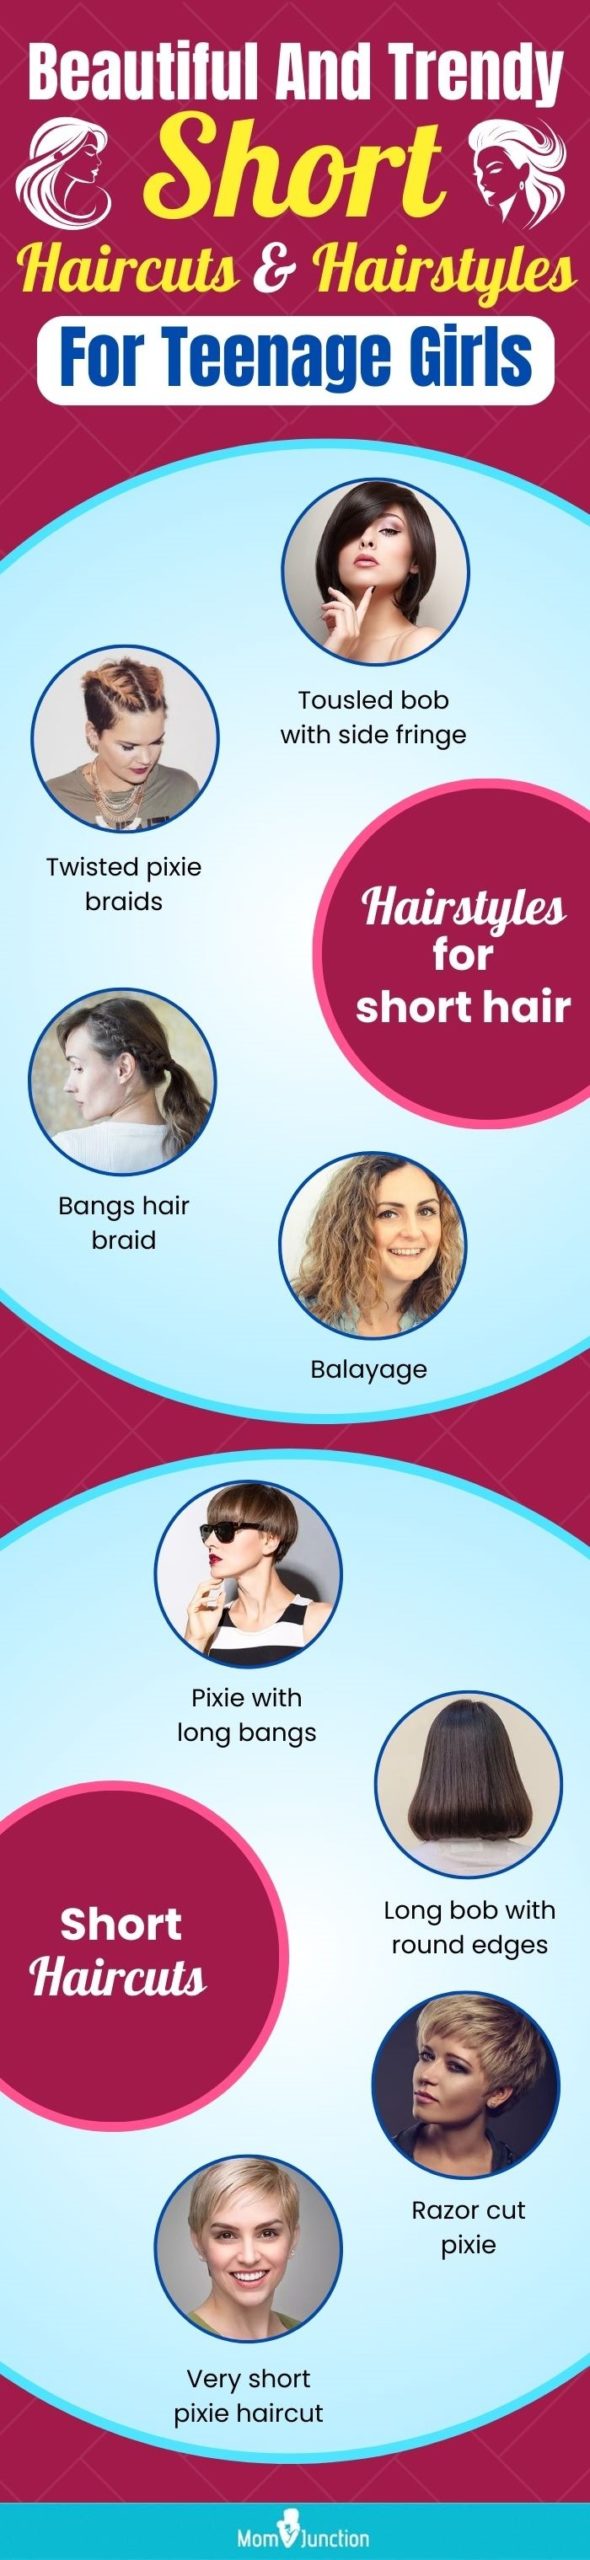 beautiful and trendy short haircuts and hairstyles for teenage girls (infographic)